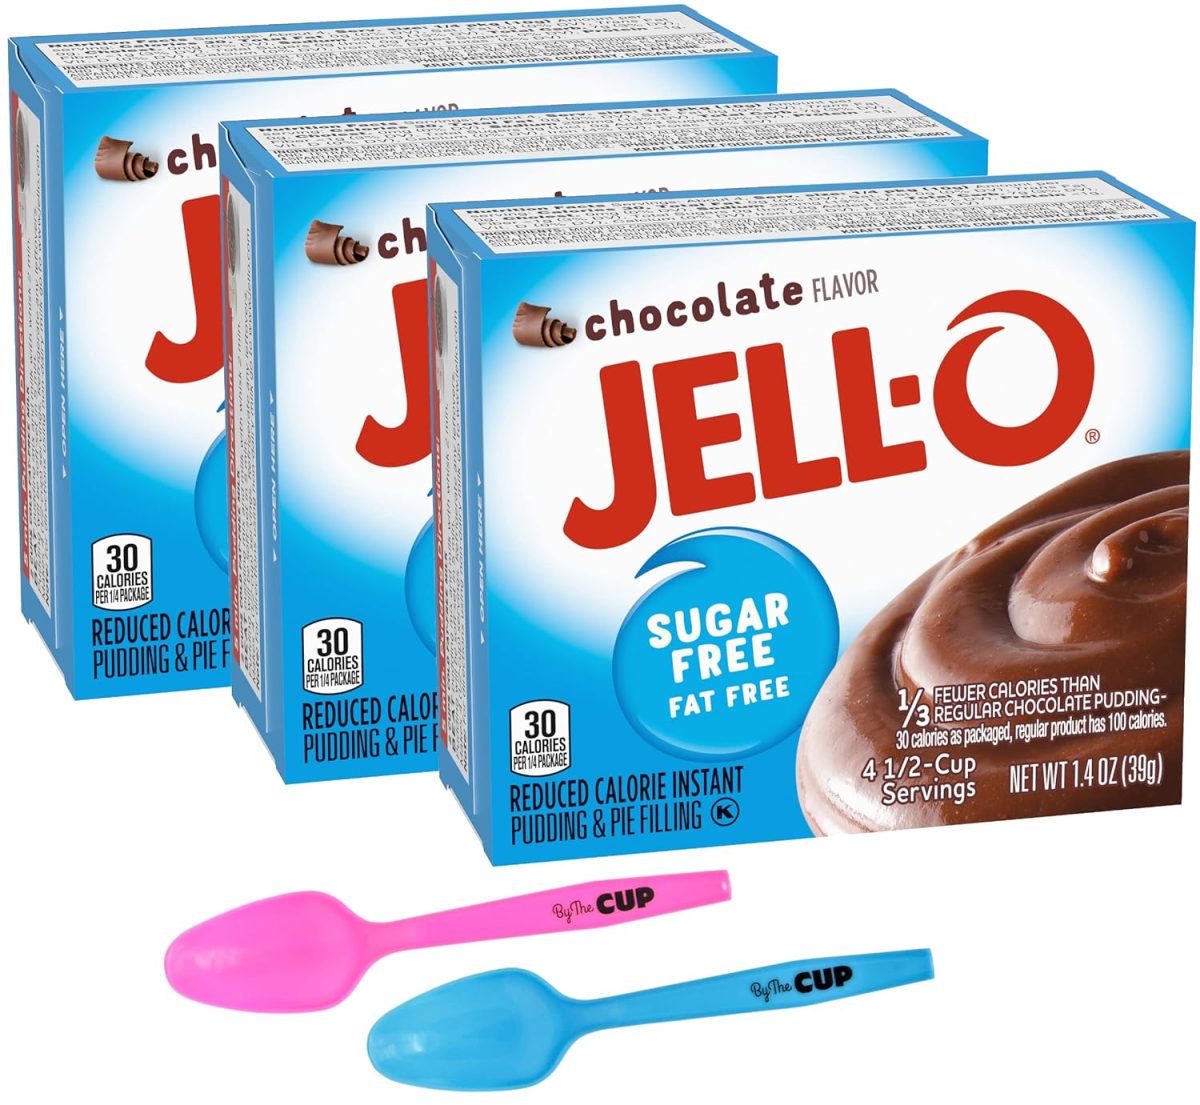 Jell-O Sugar Free Chocolate Instant Pudding & Pie Filling Mix